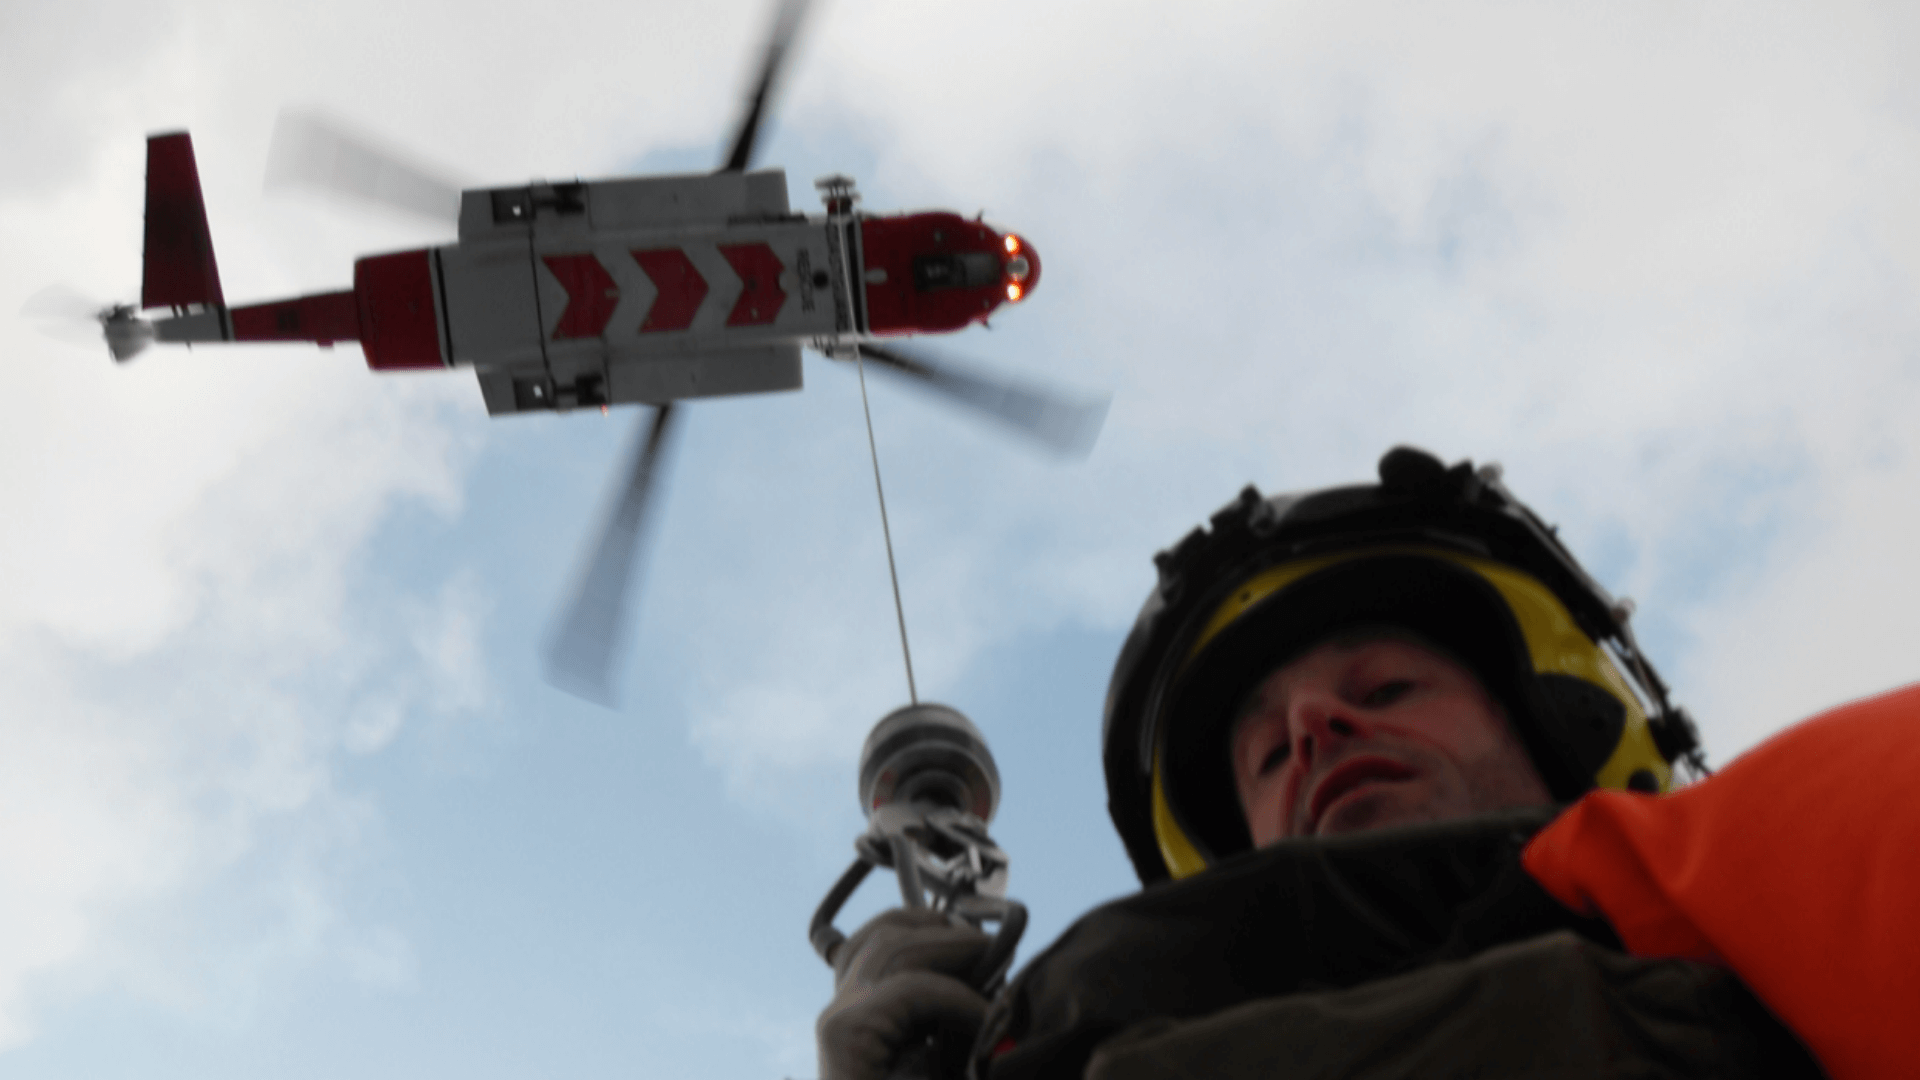 Man dangling from helicopter